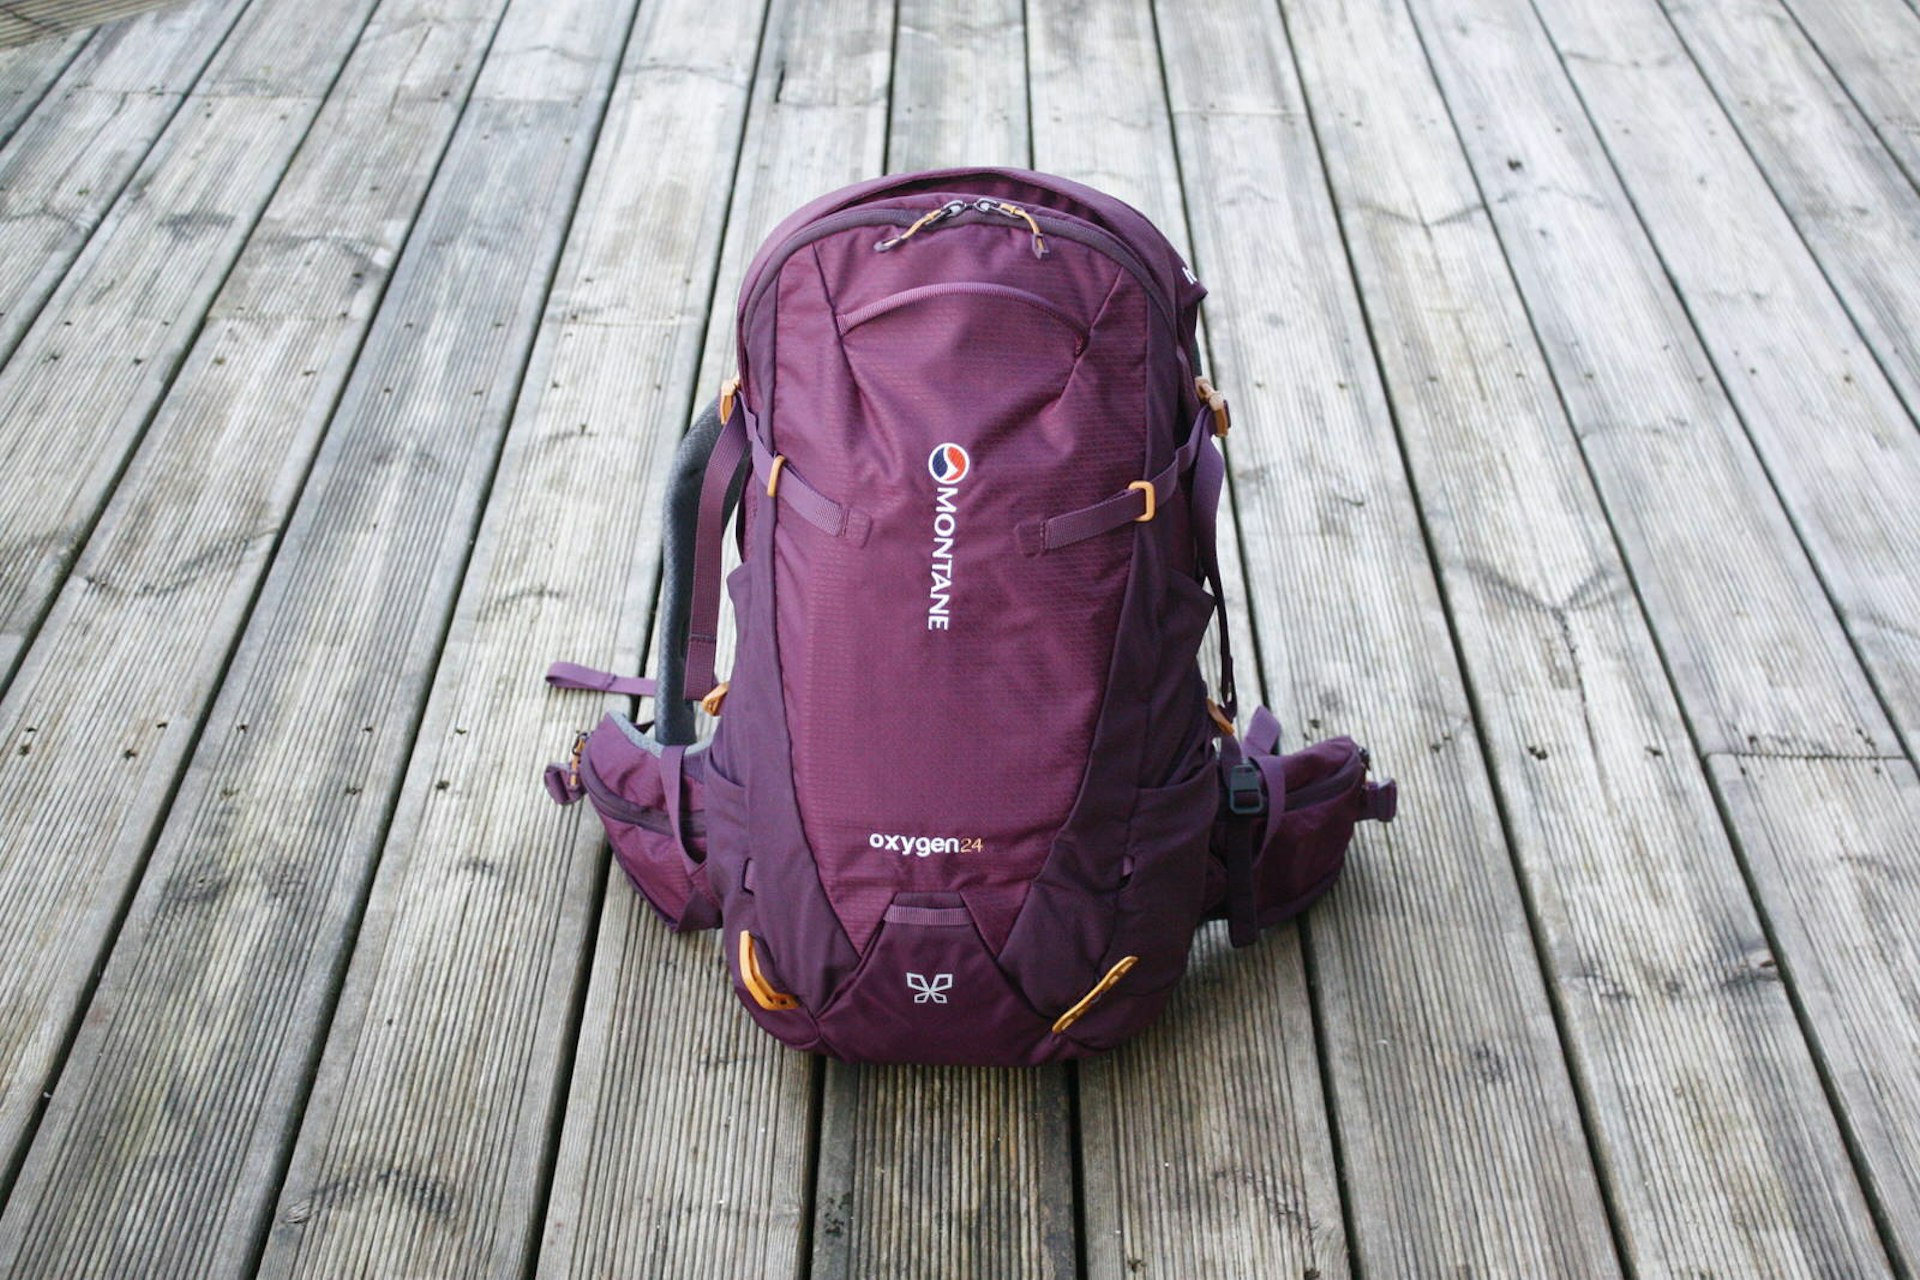 Travel light, travel far with the Oxygen 24 backpack from Montane © David Else / Lonely Planet